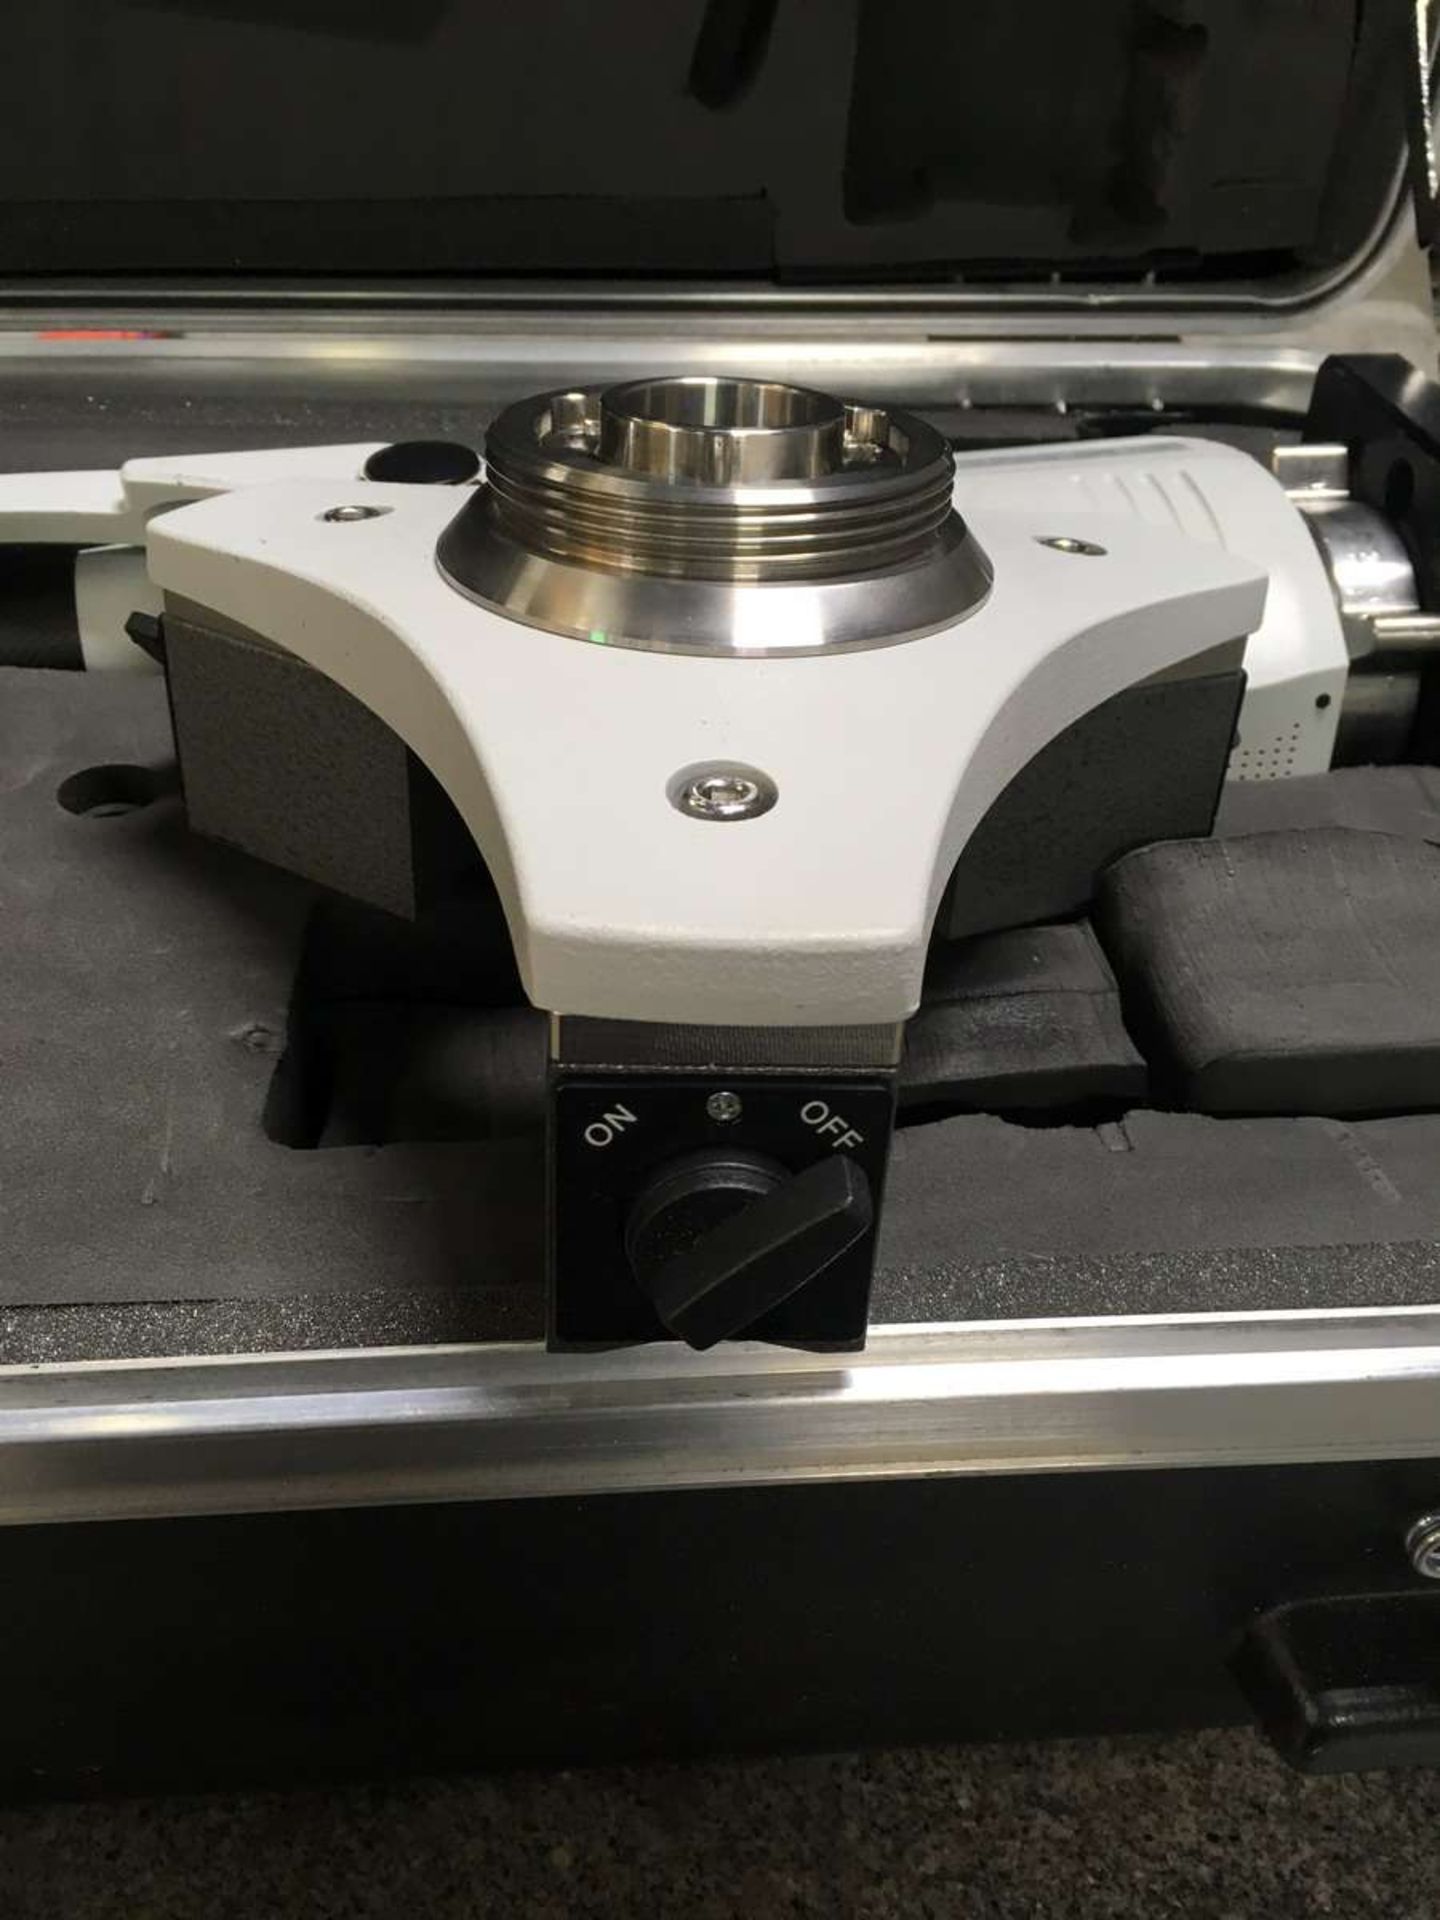 Hexagon Calibration 4.5 Romer Absolute Arm - Image 7 of 9